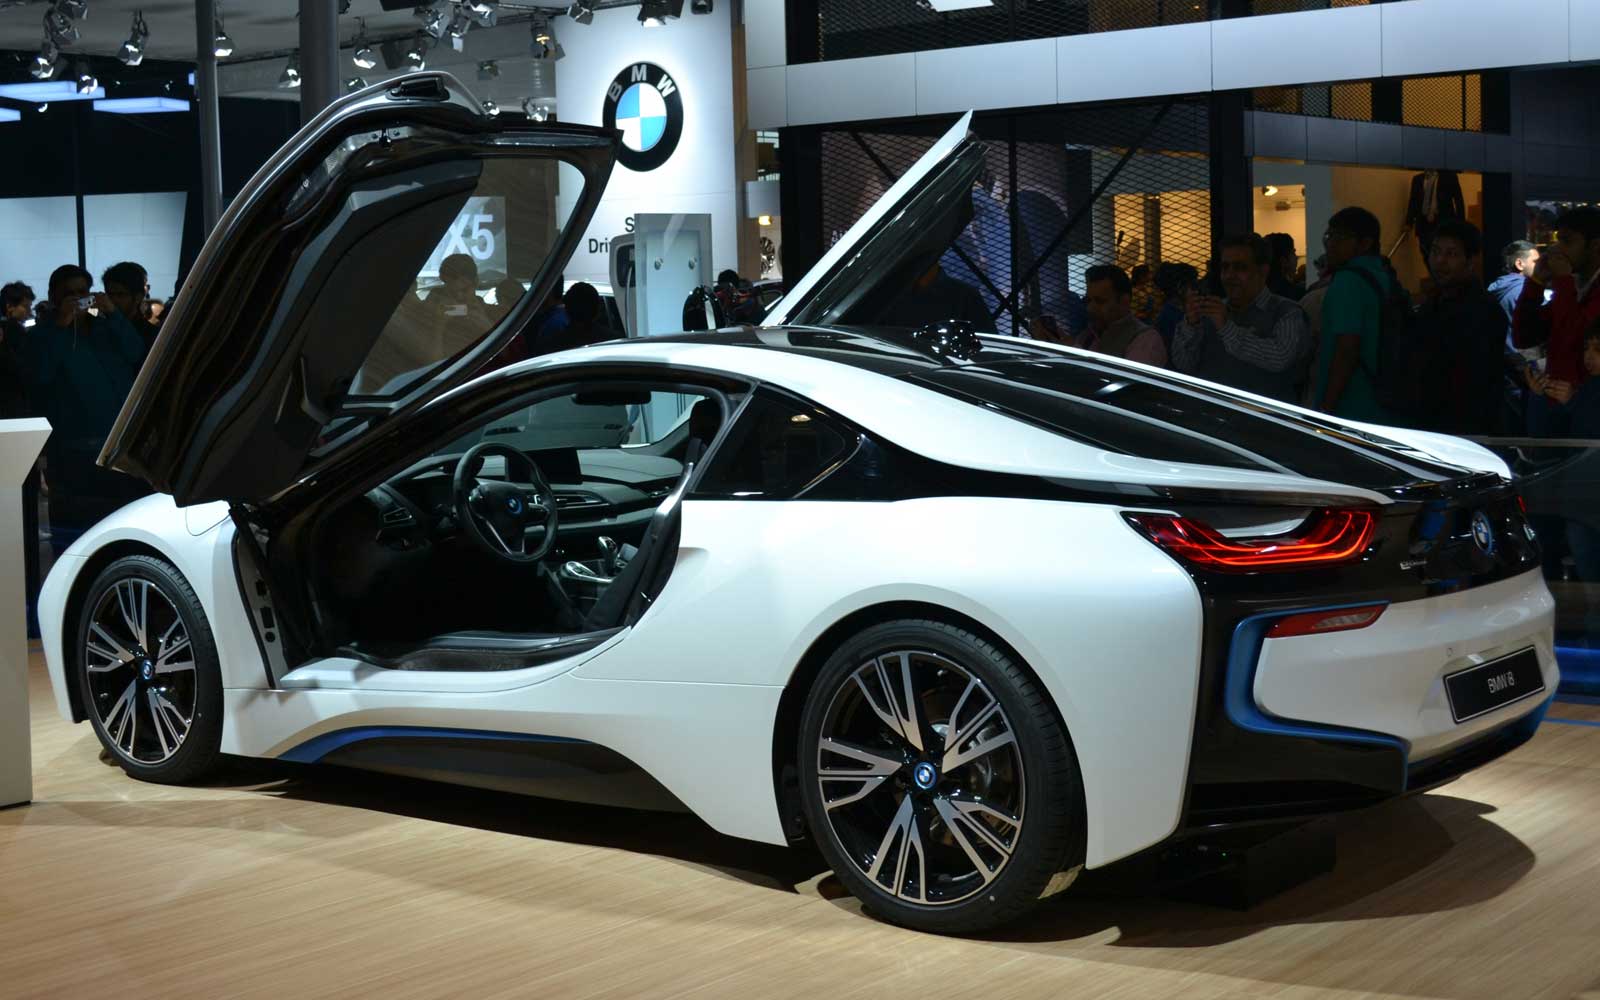 BMW to ramp up petrol engine in all models